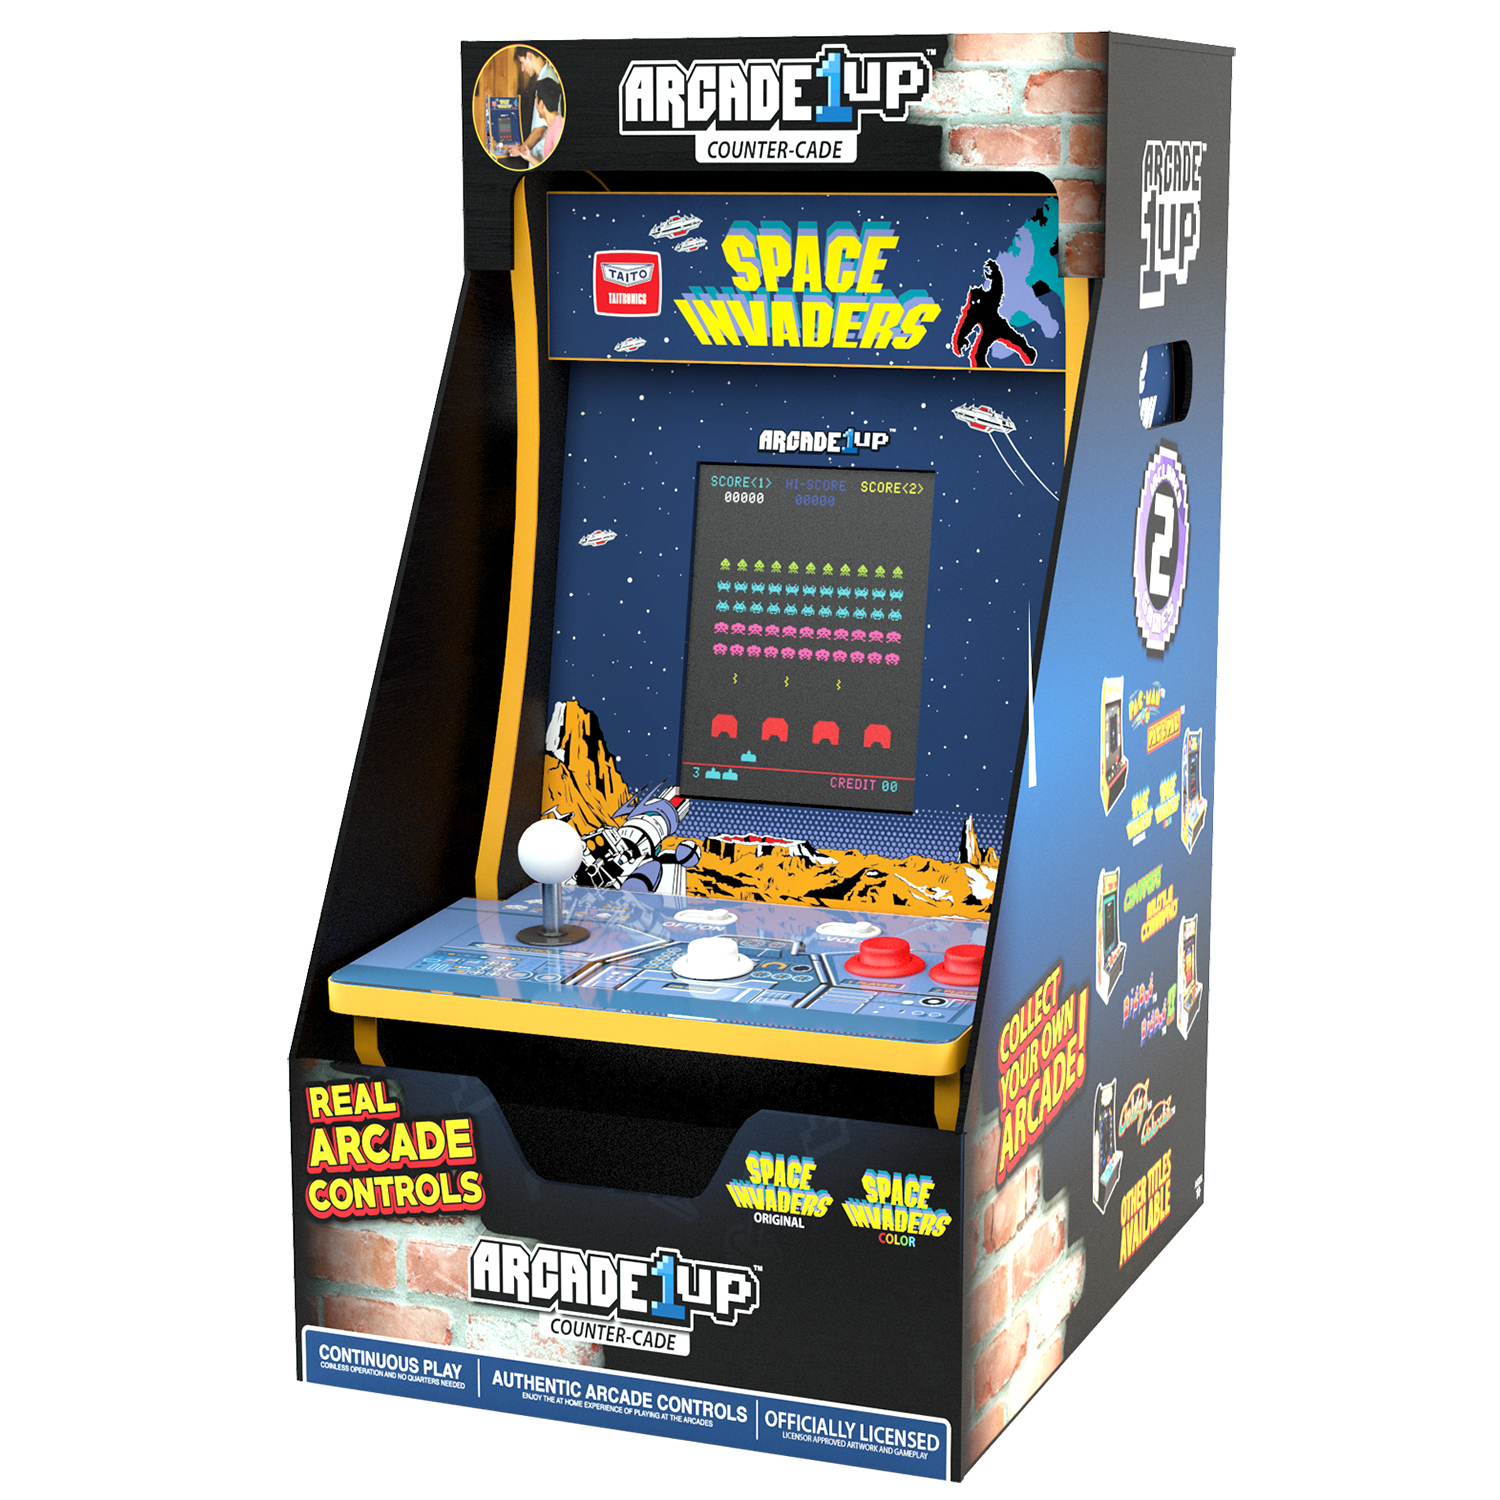 Space Invaders Counter Arcade Machine, Arcade1UP - image 6 of 8